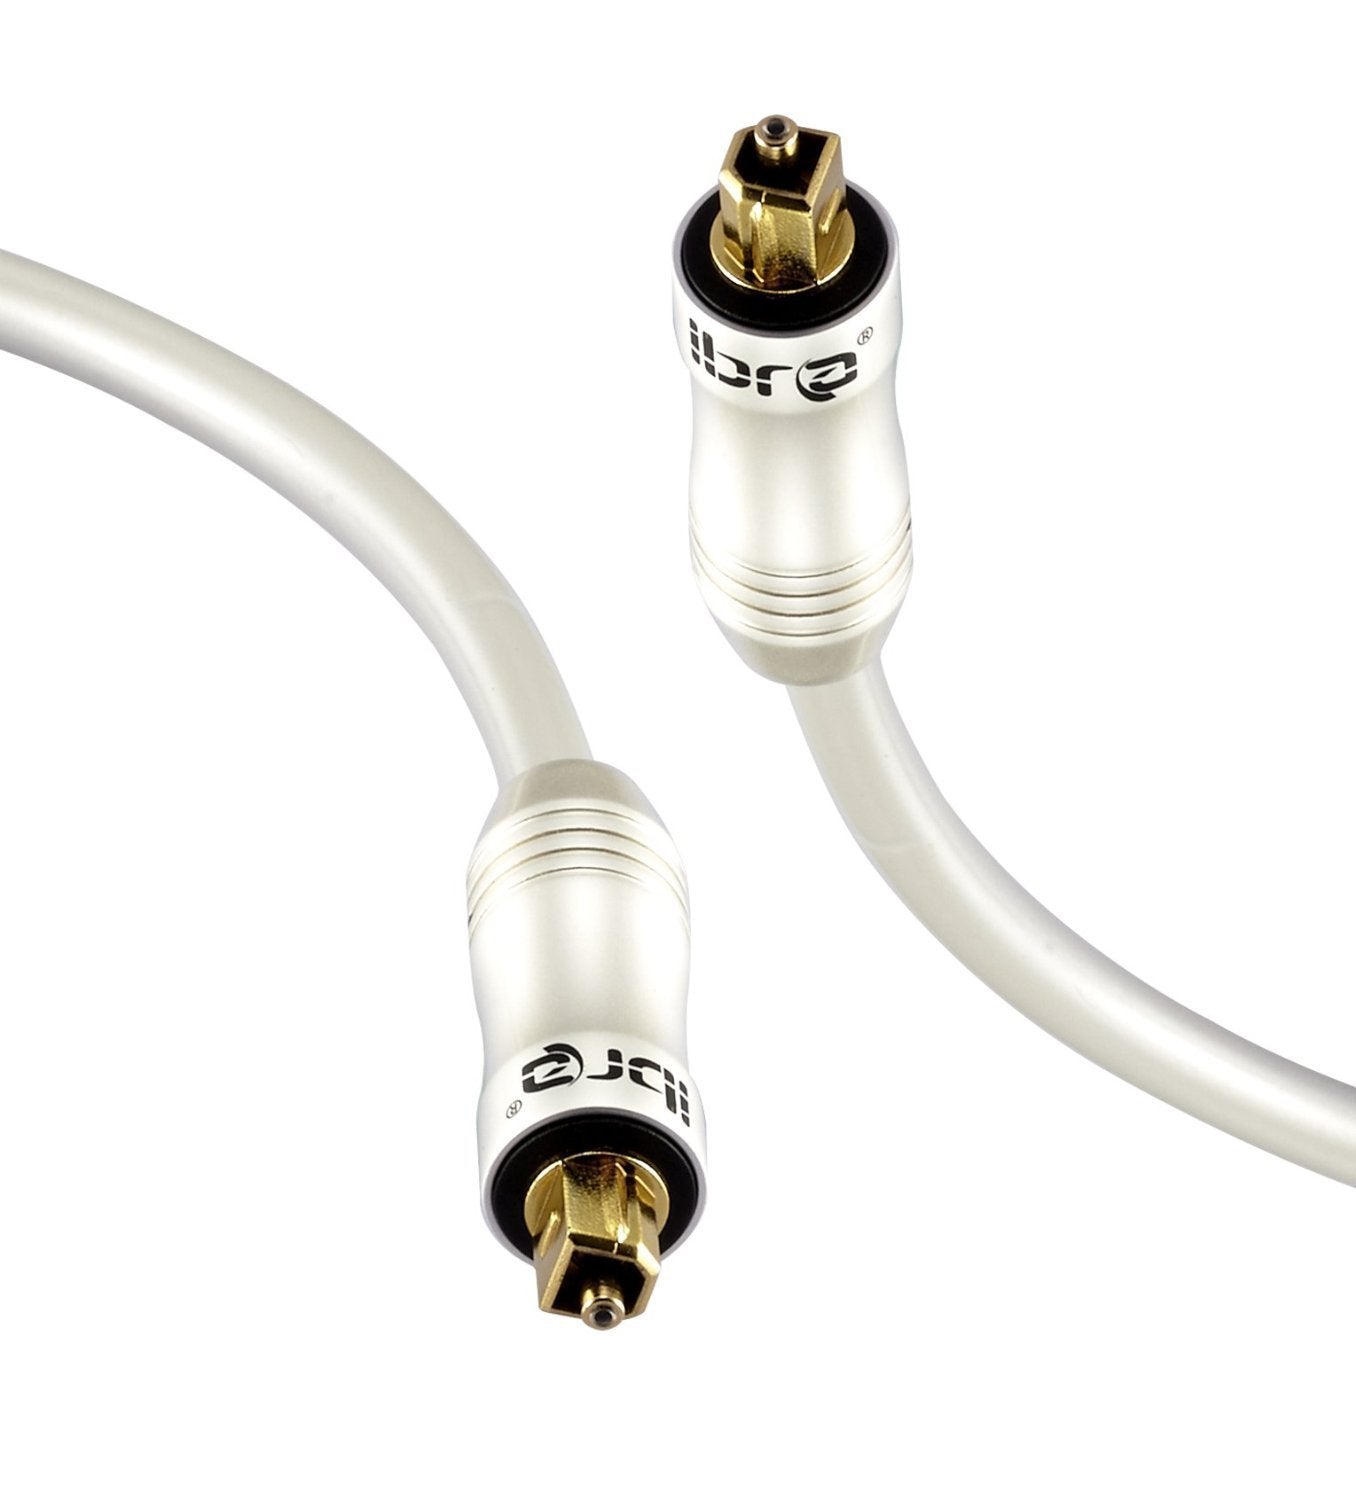 IBRA PEARL 1M - Digital Optical Cable | Toslink / Audio Cable | Fibre Optic Cable | Suitable for PS3, Sky, Sky HD, LCD, LED, Plasma, Blu-ray, AV Amps